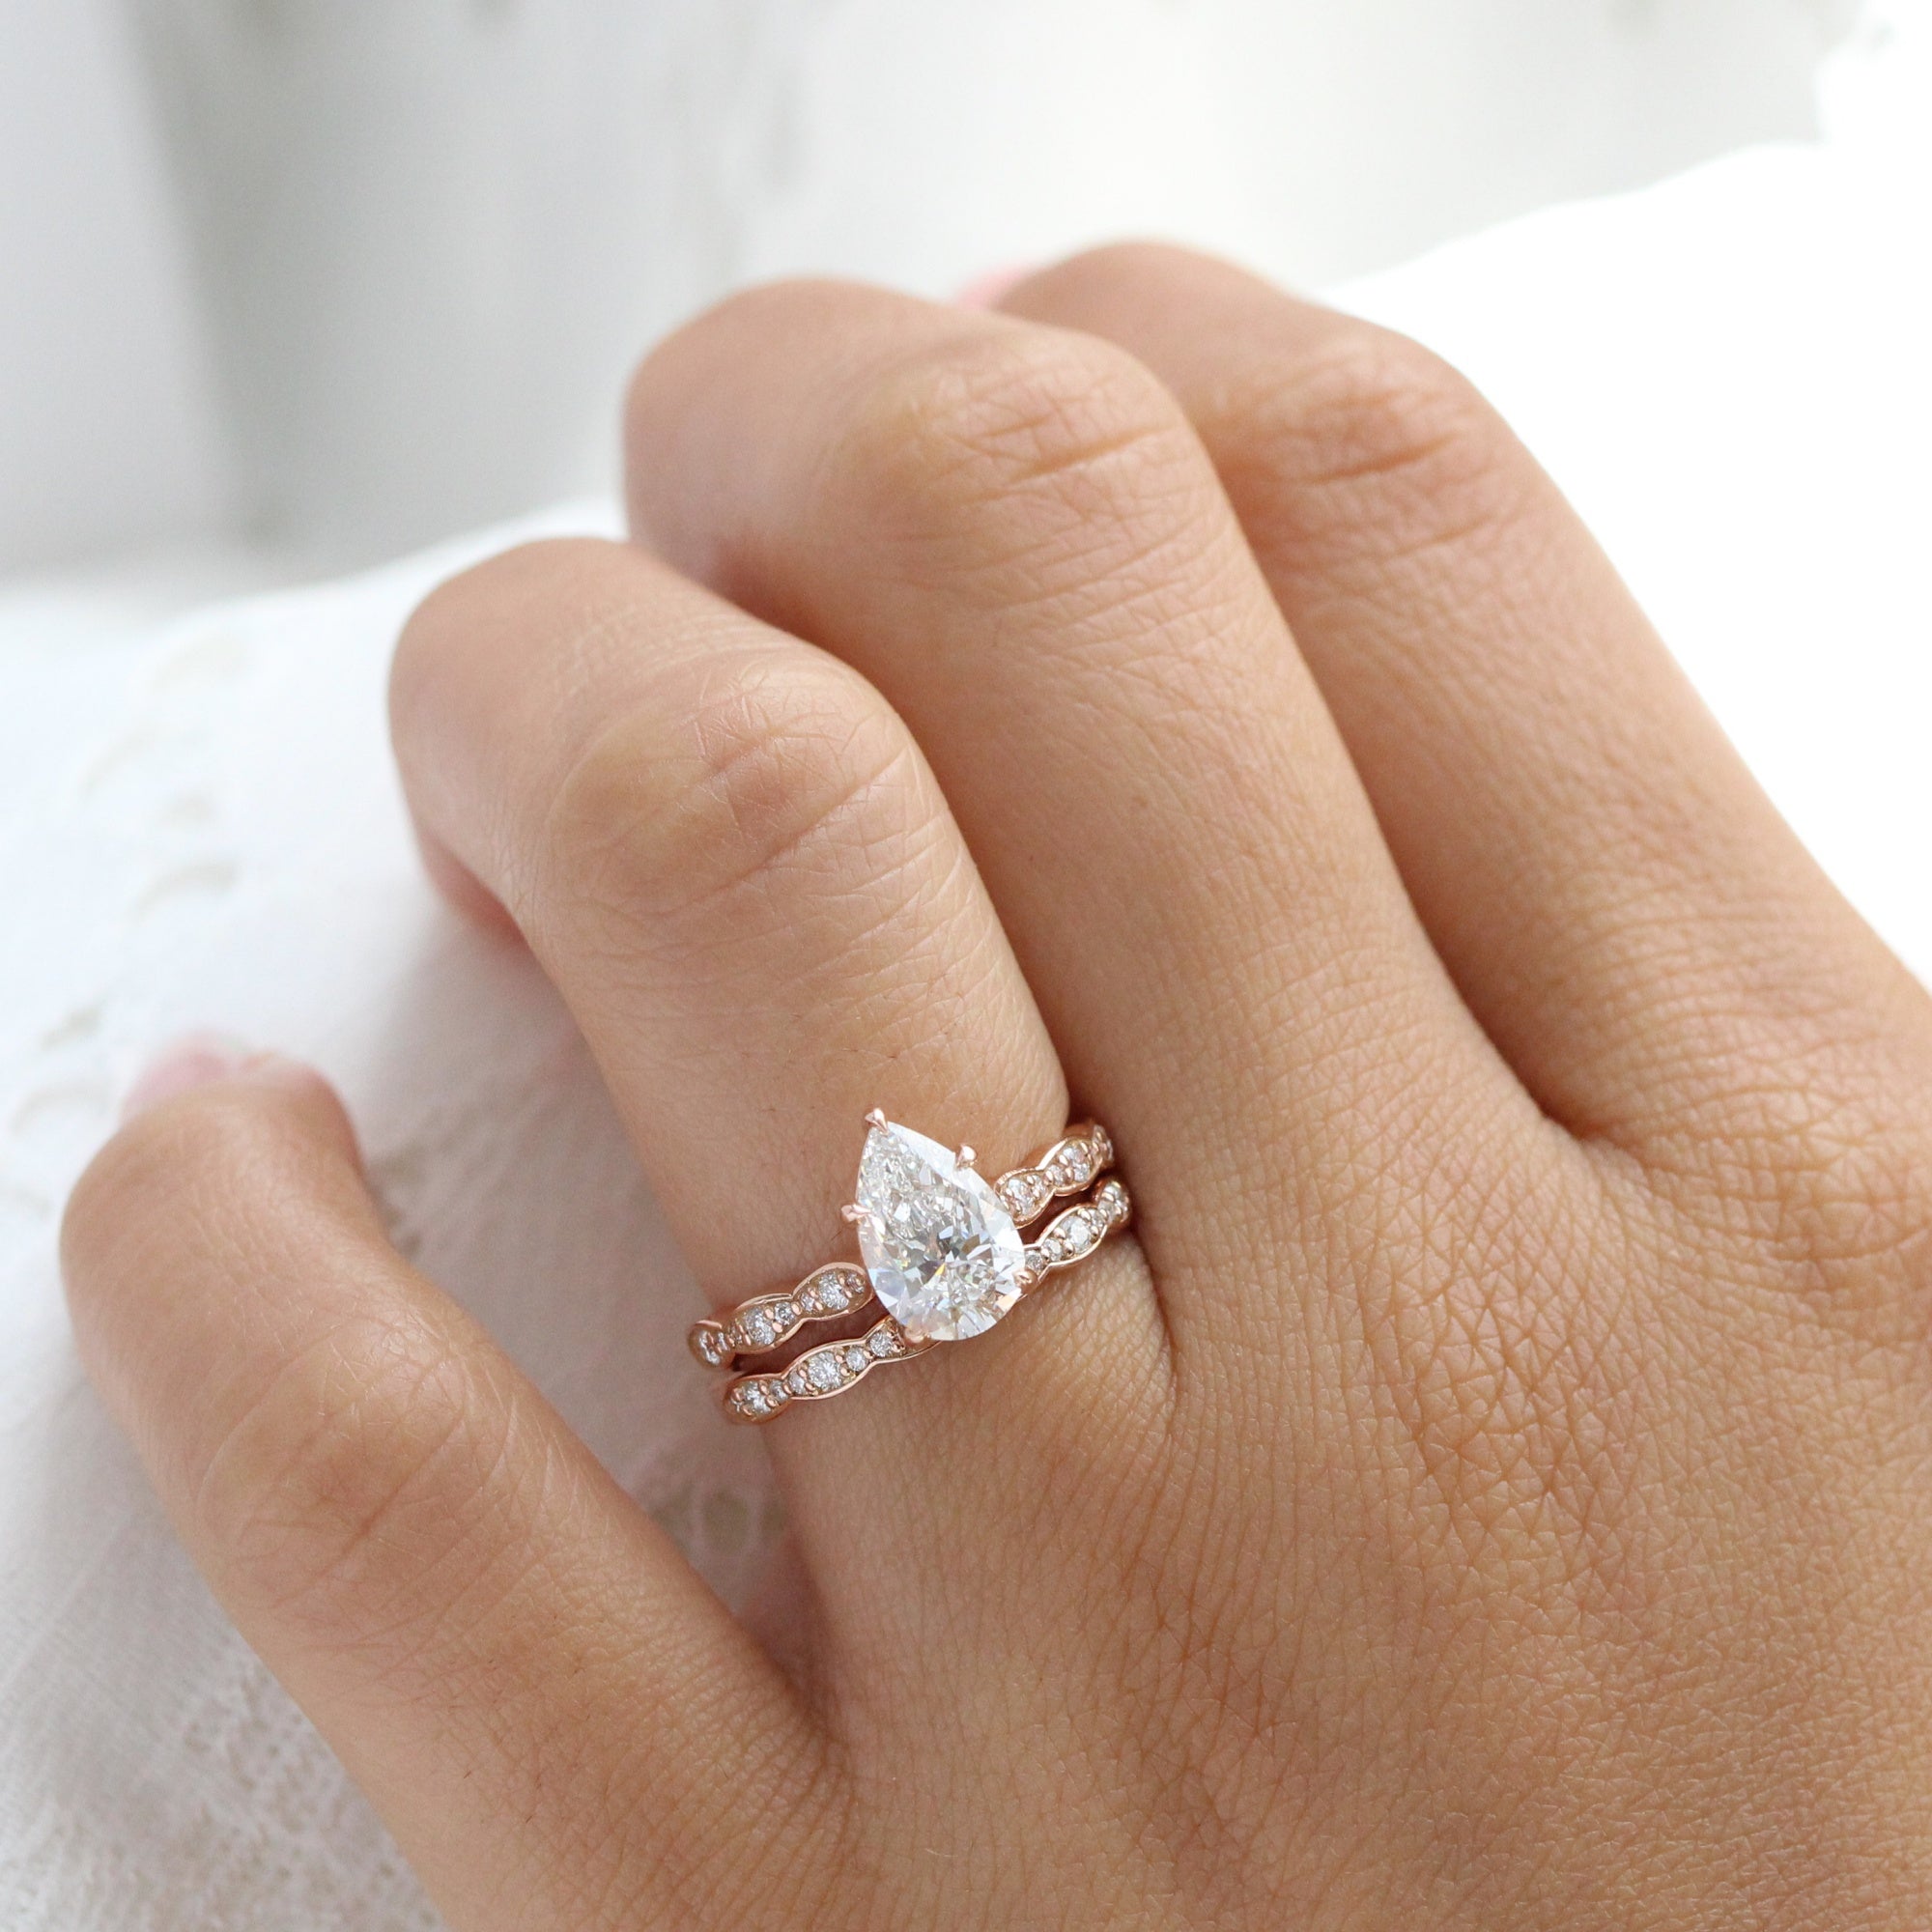 We are loving pearl engagement rings, the new jewellery for brides